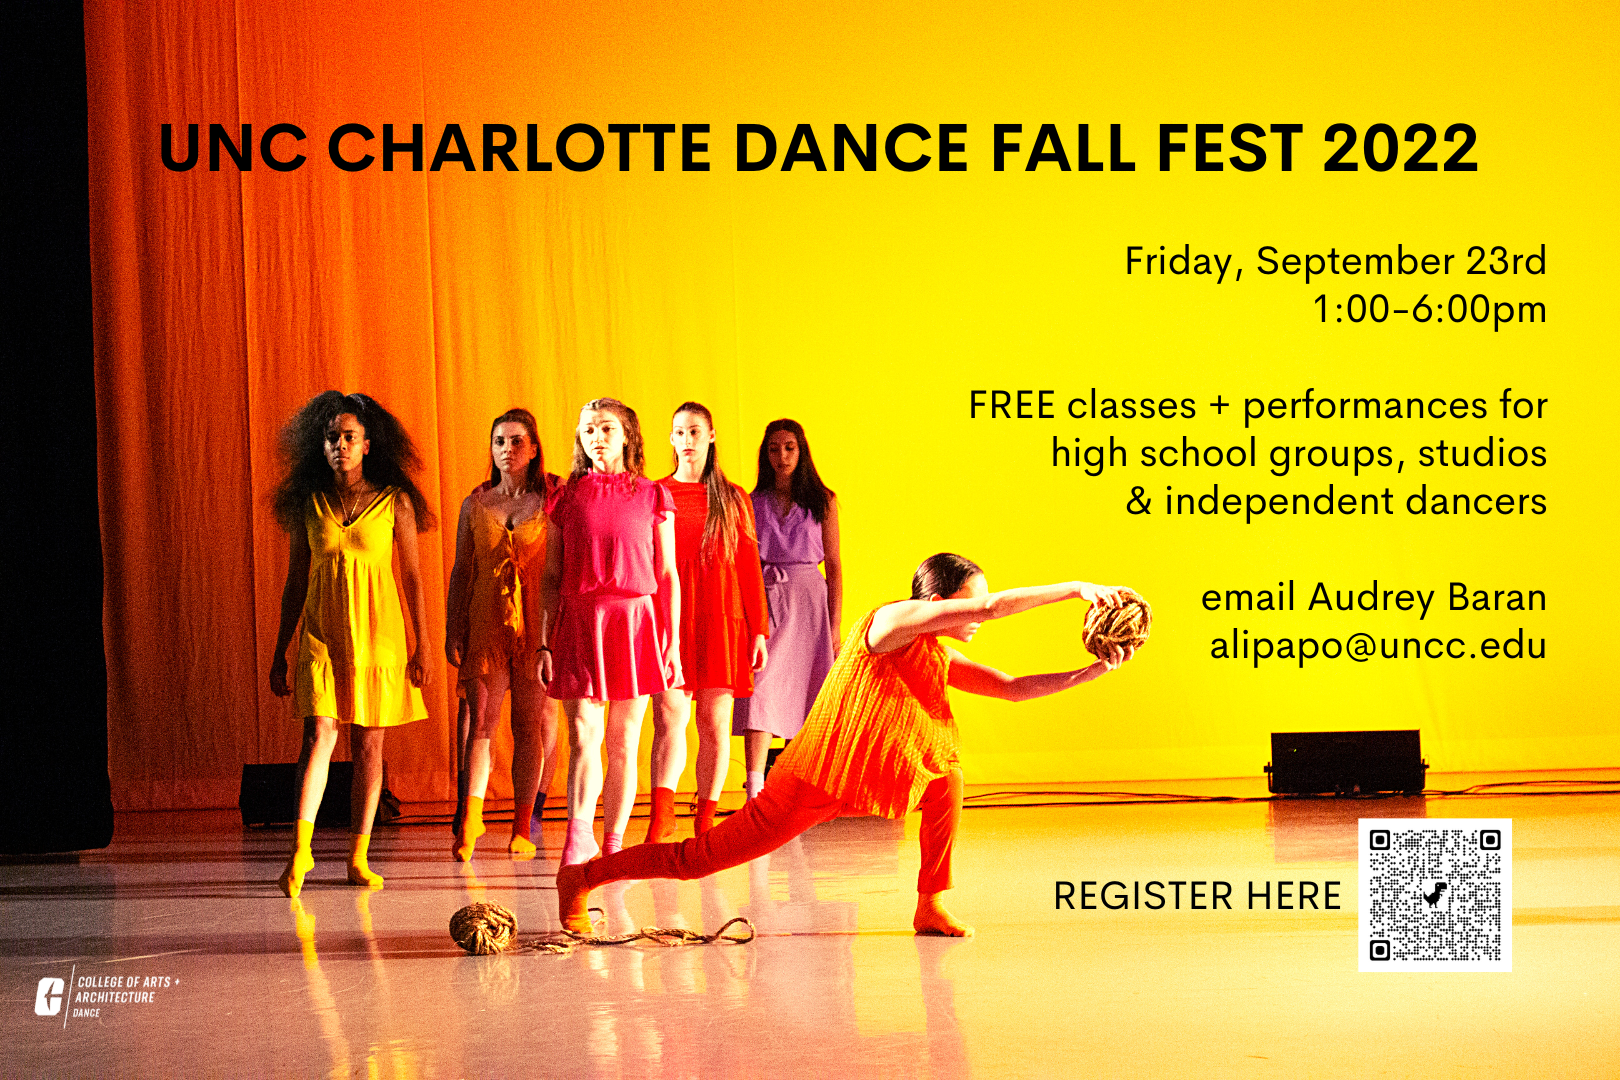 unc charlotte dancers for fall fest for dance classes for high school students